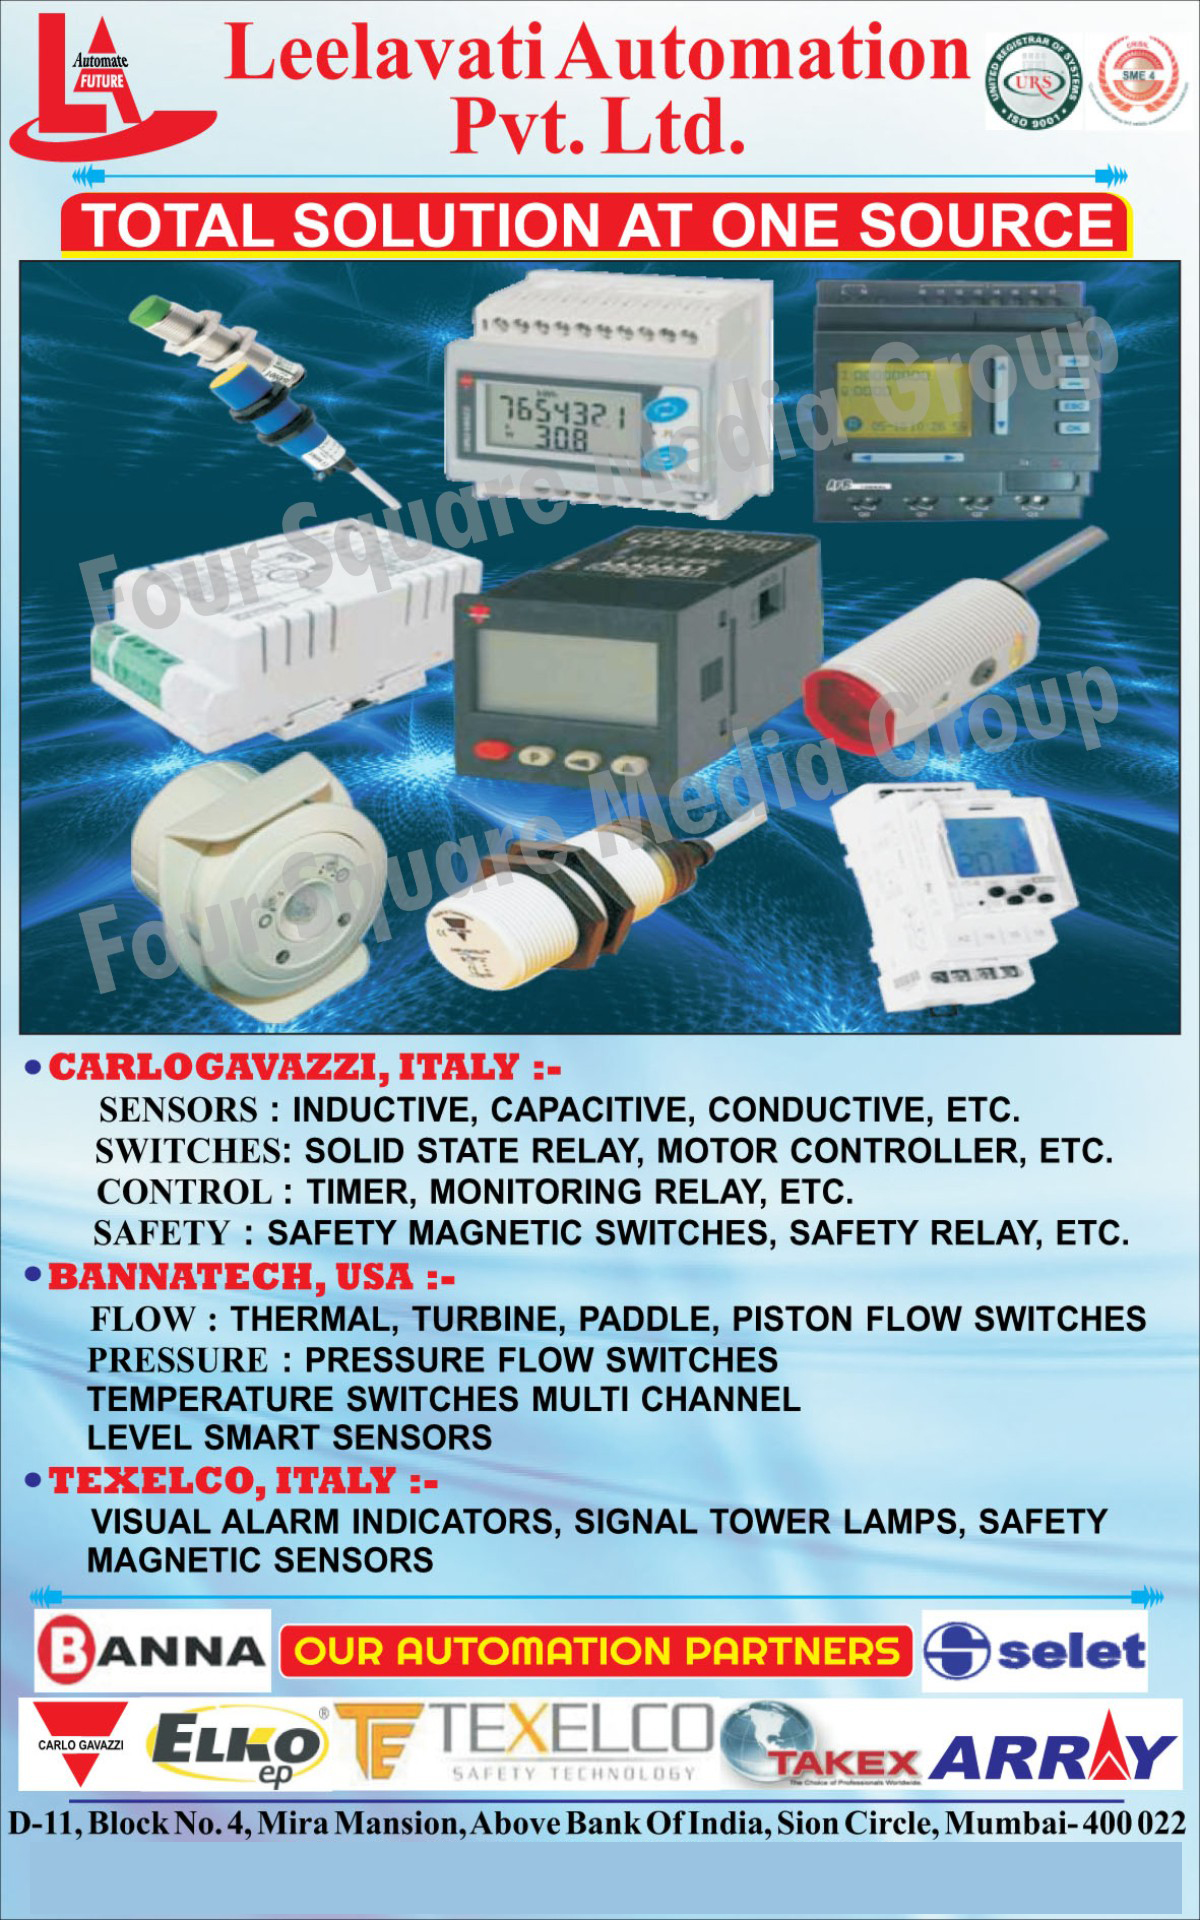 Inductive Sensors, Capacitive Sensors, Conductive Sensors, Solid State Relay Switches, Motor Controller Switches, Timer, Monitoring relays, Safety magnetic Switches, Safety Relays, Thermal Flow Switches, Turbine Flow Switches, Paddle Flow Switches, Piston Flow Switches, Pressure Flow Switches, Temperature Switches Multi Channel, Level Smart Sensors, Visual Alarm Indicators, Signal Tower Lamps, Safety magnetic Sensors